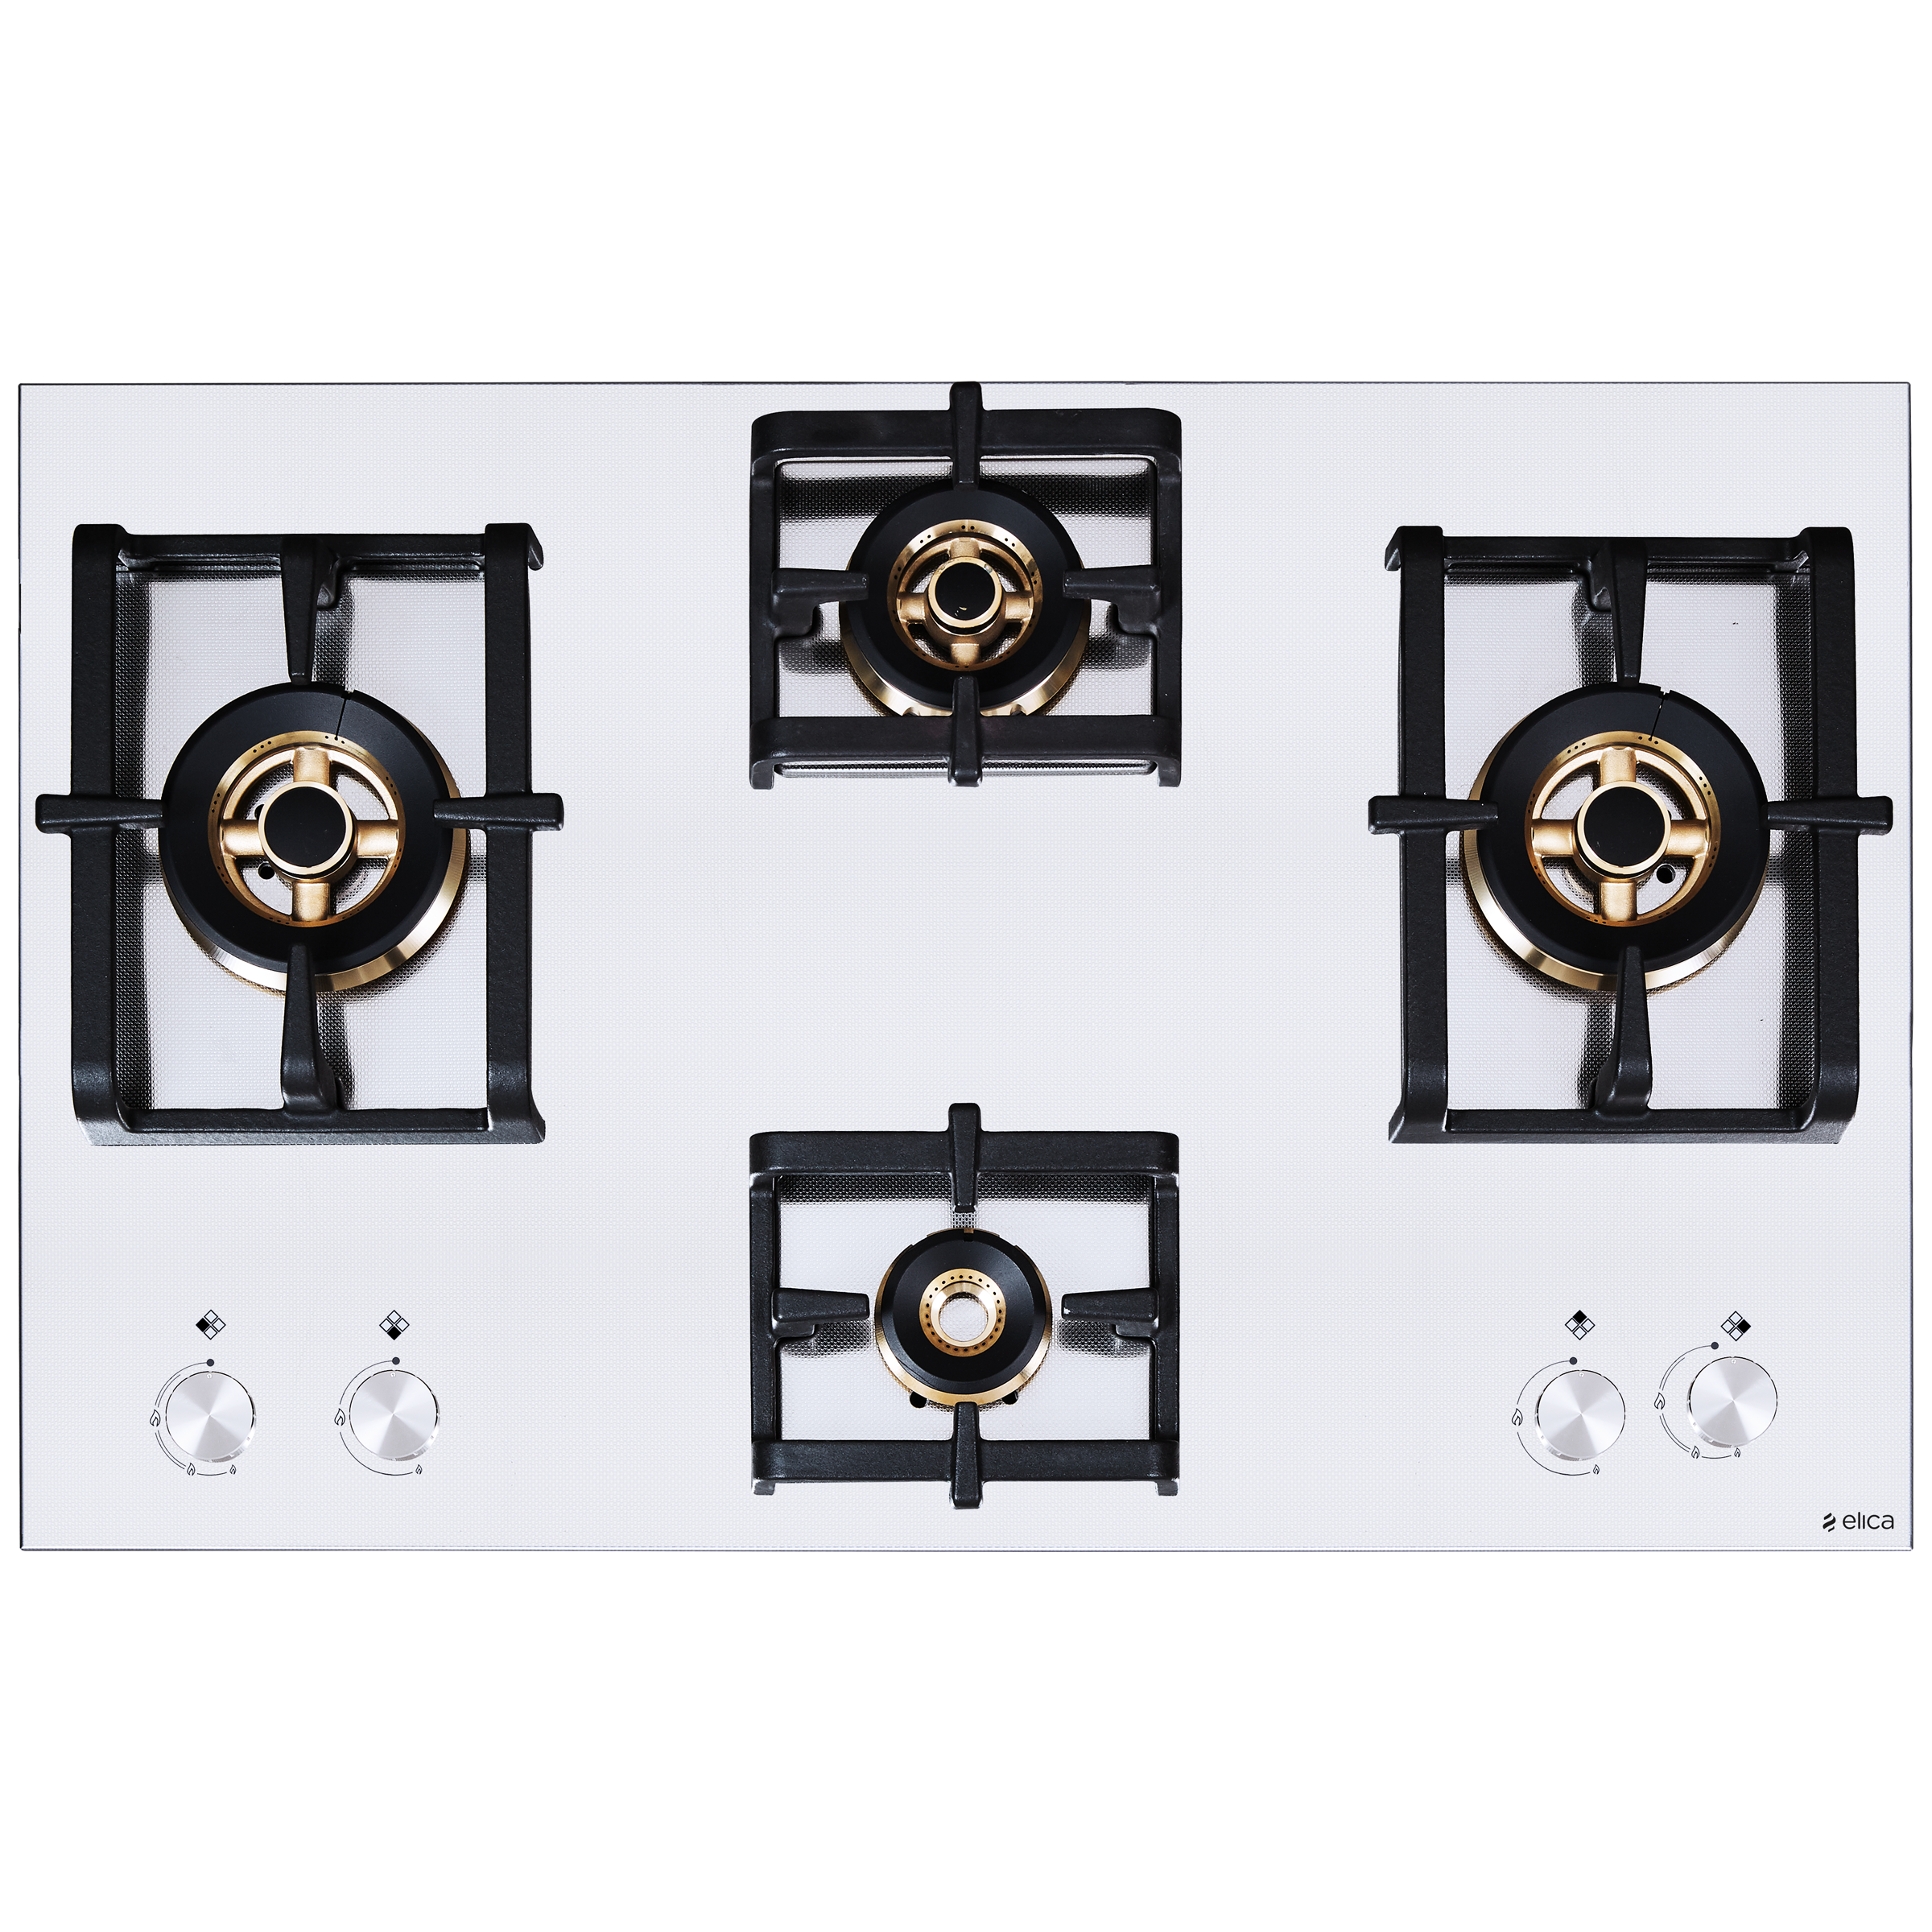 Elica Inox Pro FB MFC 4B 91 DX 4 Burner Stainless Steel Built-in Gas Hob (Cast Iron Grids, 3021, Steel)_1